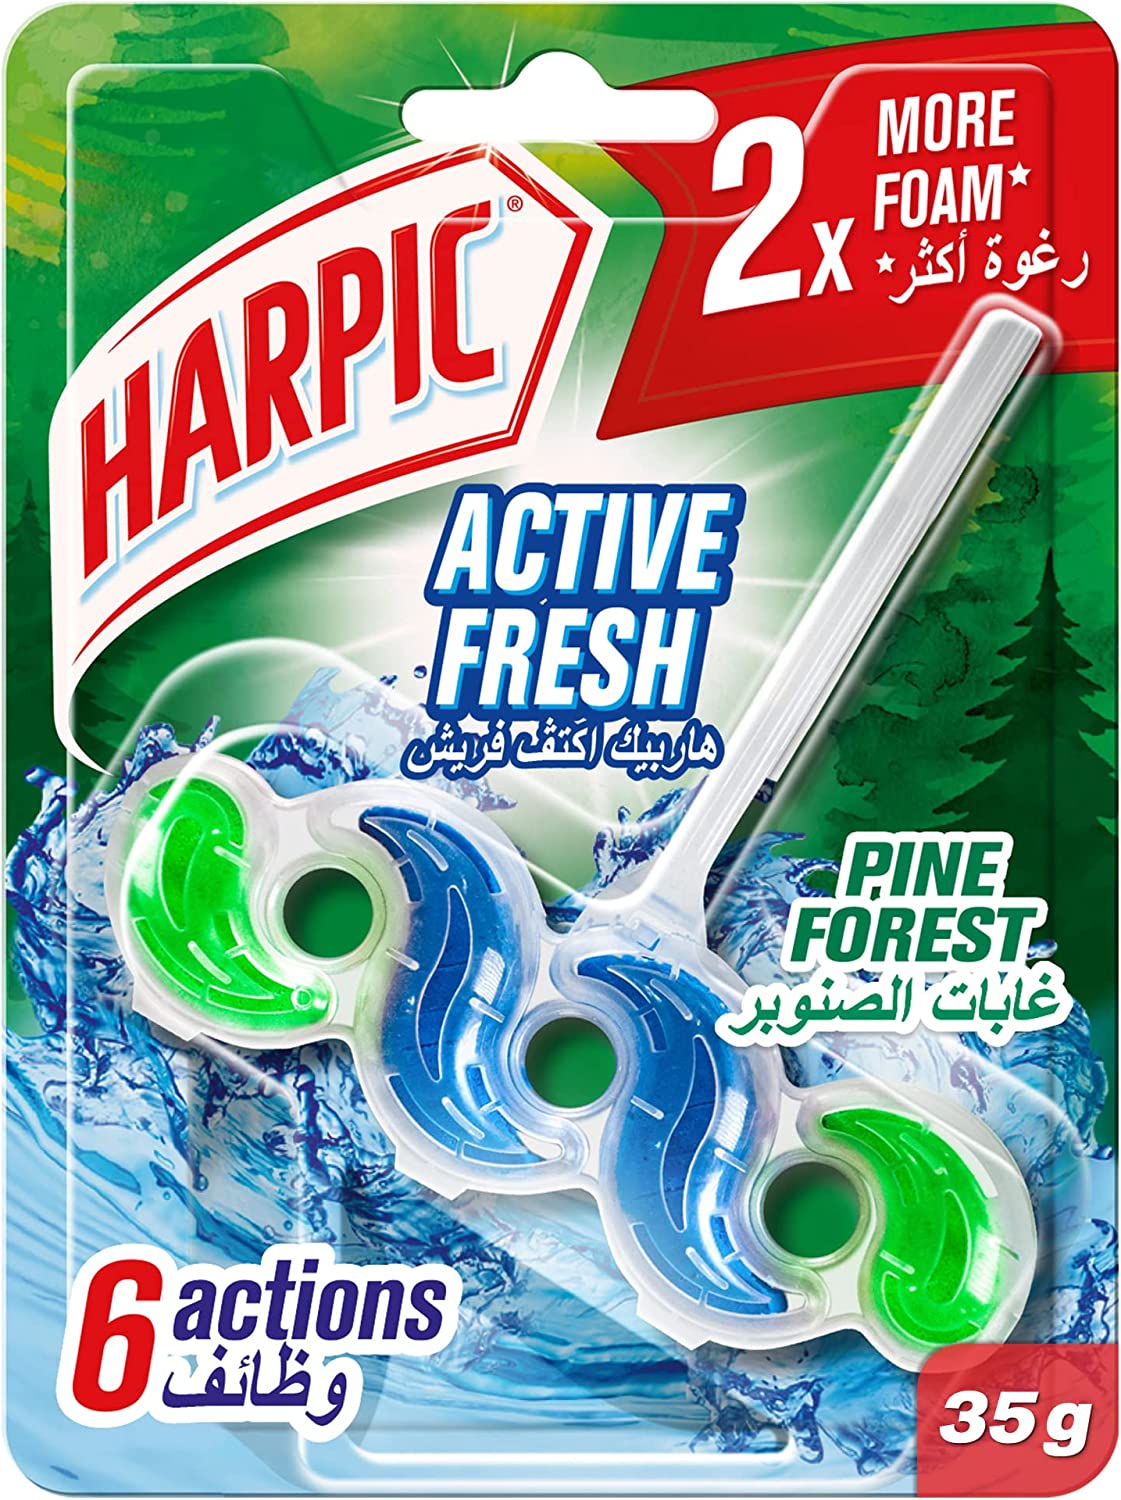 Harpic Active Fresh Pine Forest Toilet Cleaner 2x More Foam  